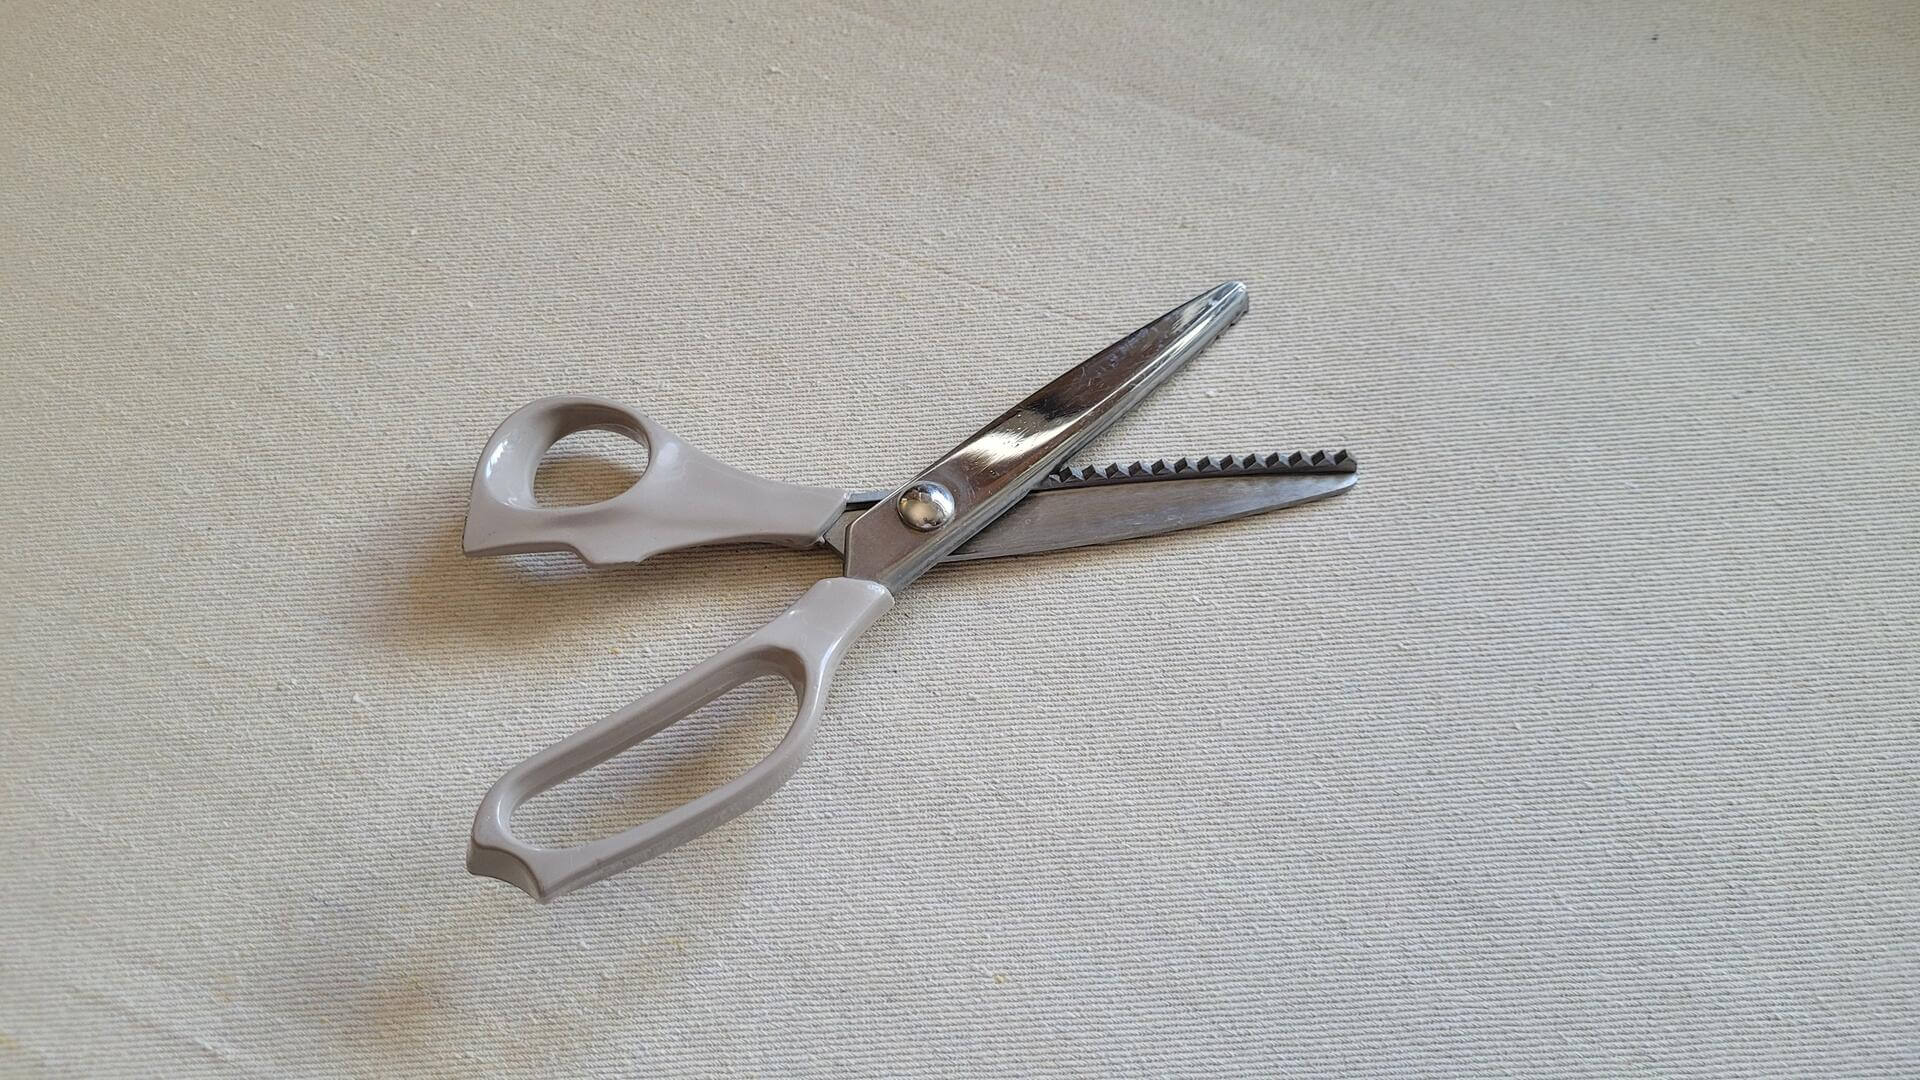 Tailorform stainless steel dressmaker and tailor pinking shears scissors 8 inches long. Vintage made in Korea quality sewing and upholstery fabric cutting tools